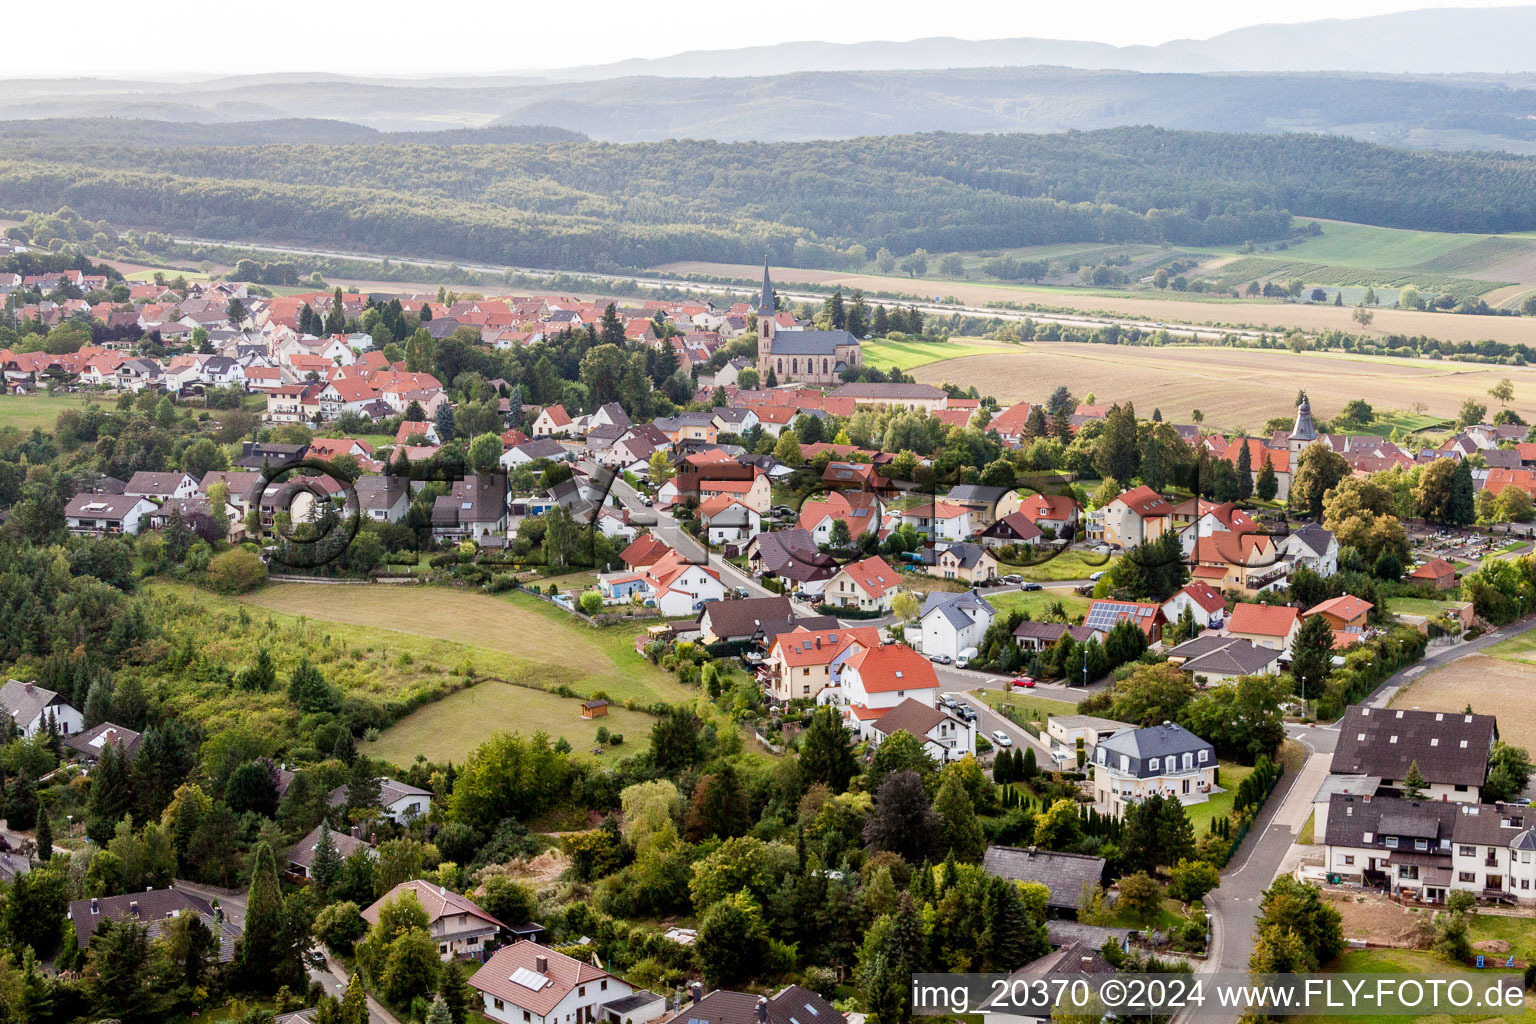 Aerial view of Village view in Wattenheim in the state Rhineland-Palatinate, Germany